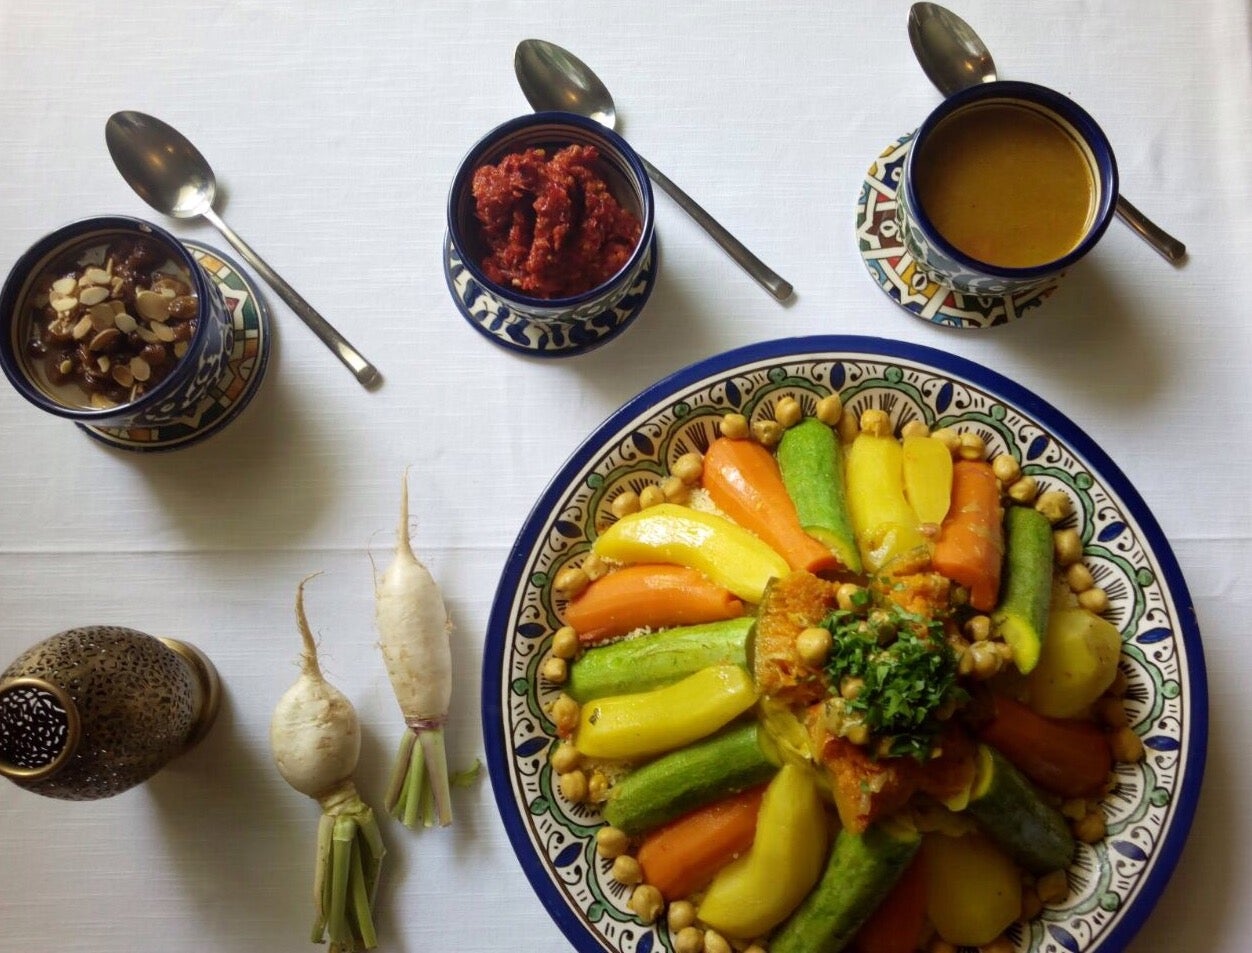 Chow down on traditional Moroccan food at the hotel restaurant